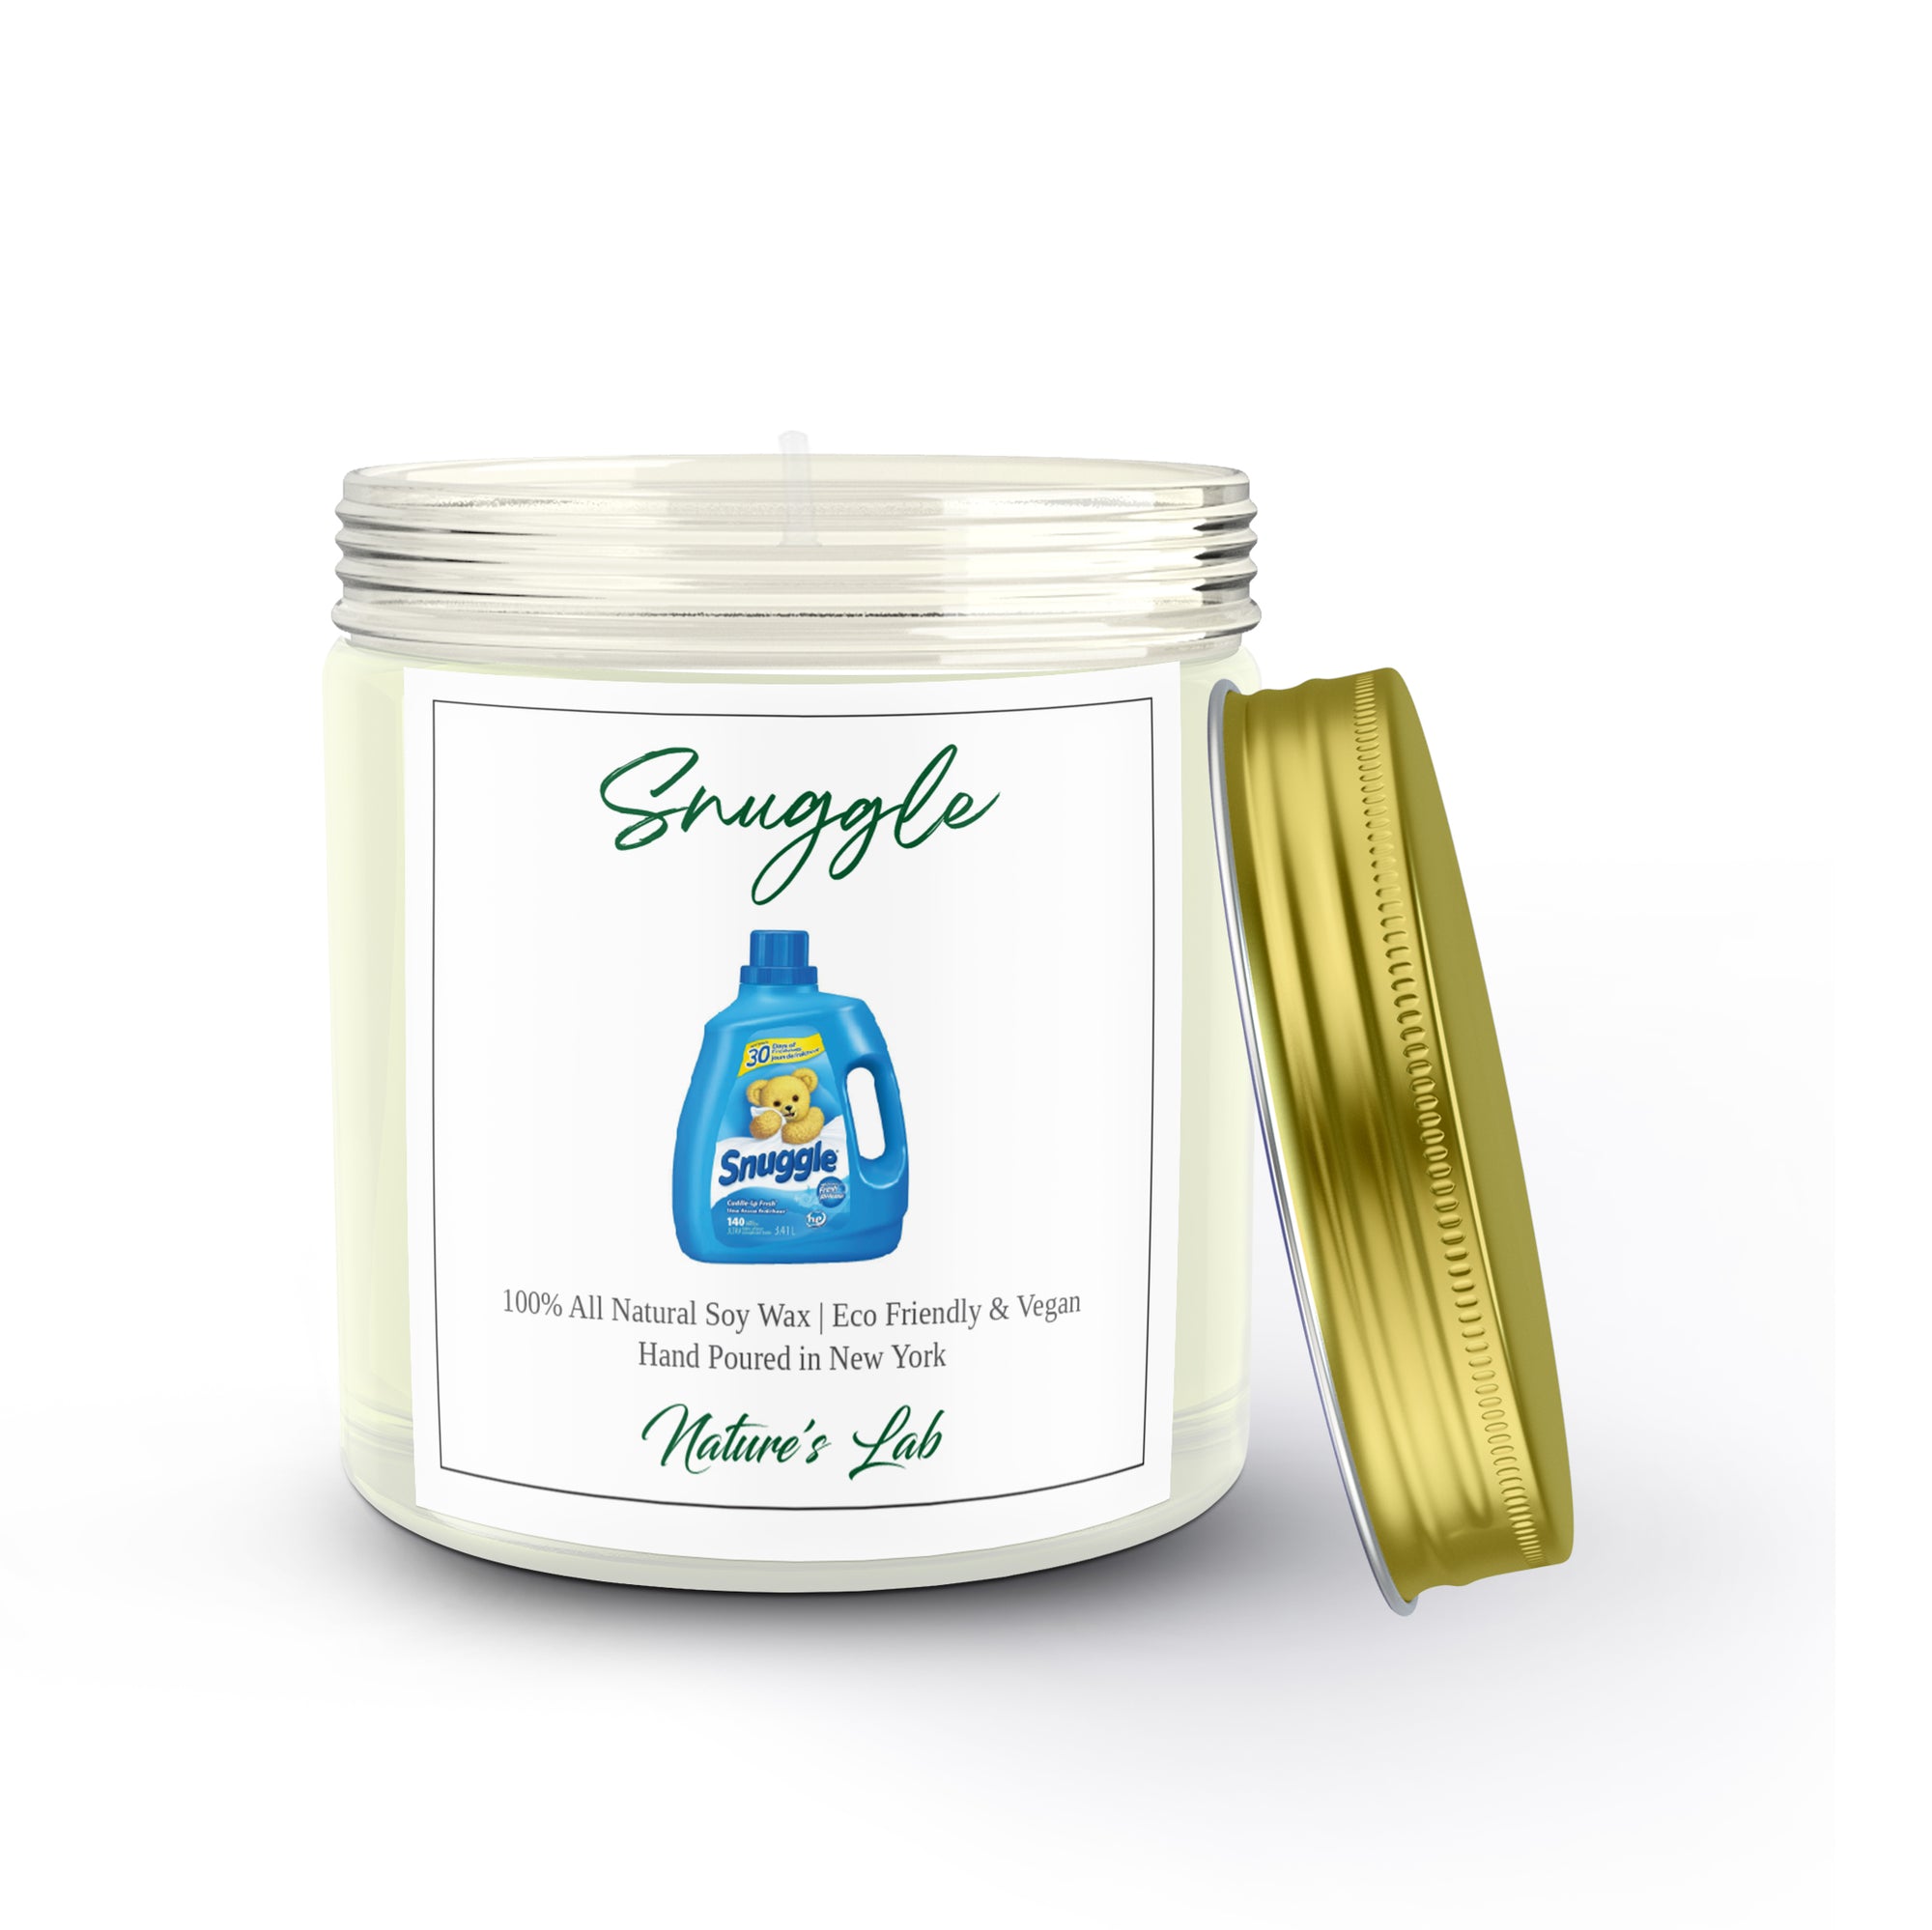 Snuggle Soy Wax Candle